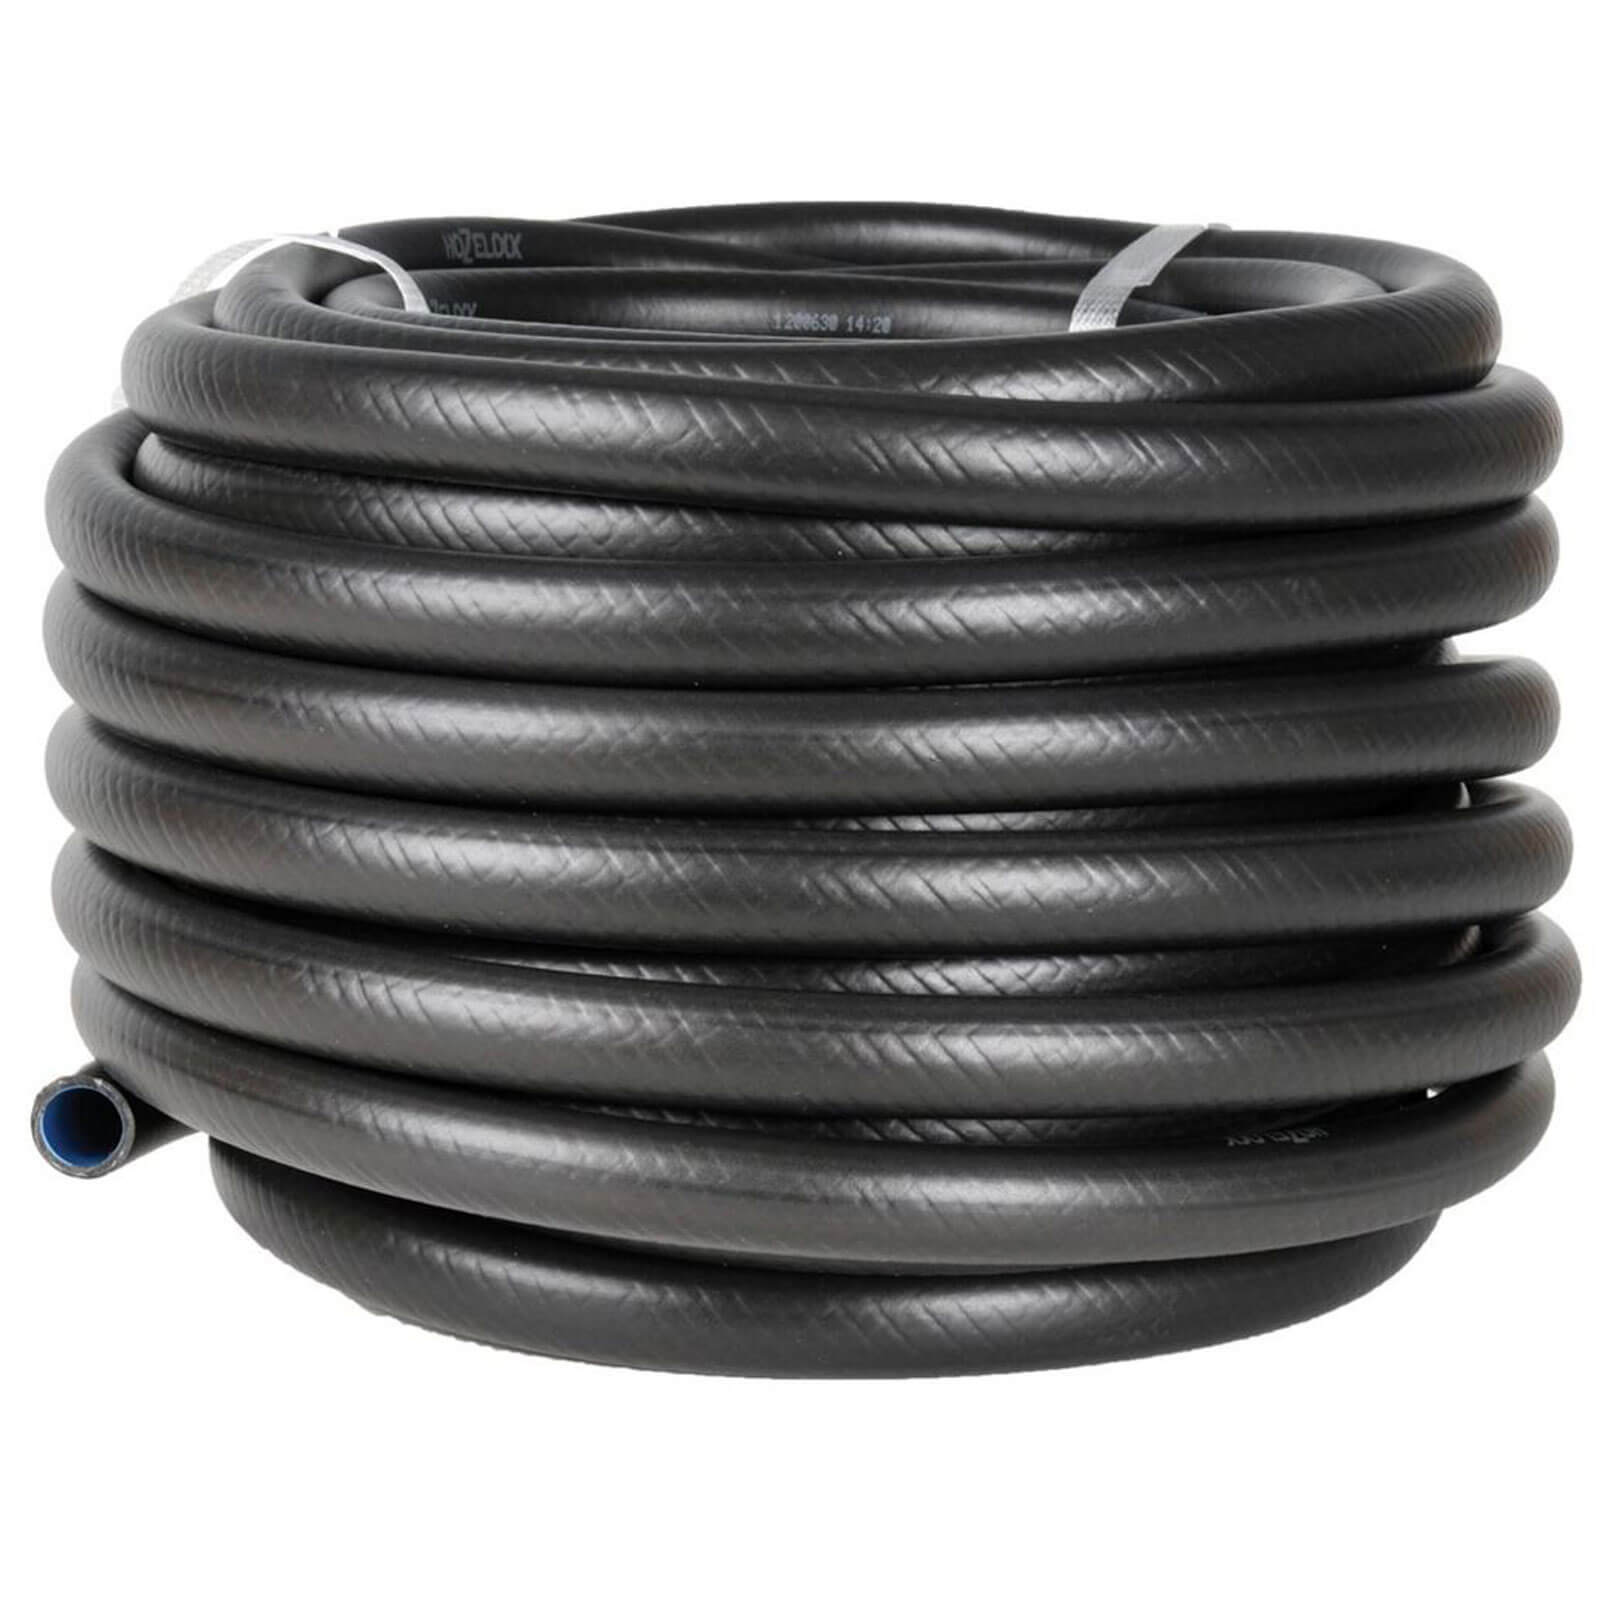 Image of Hozelock MICRO and EASY DRIP Flexible Connecting Supply Hose Pipe 1/2" / 12.5mm 20m